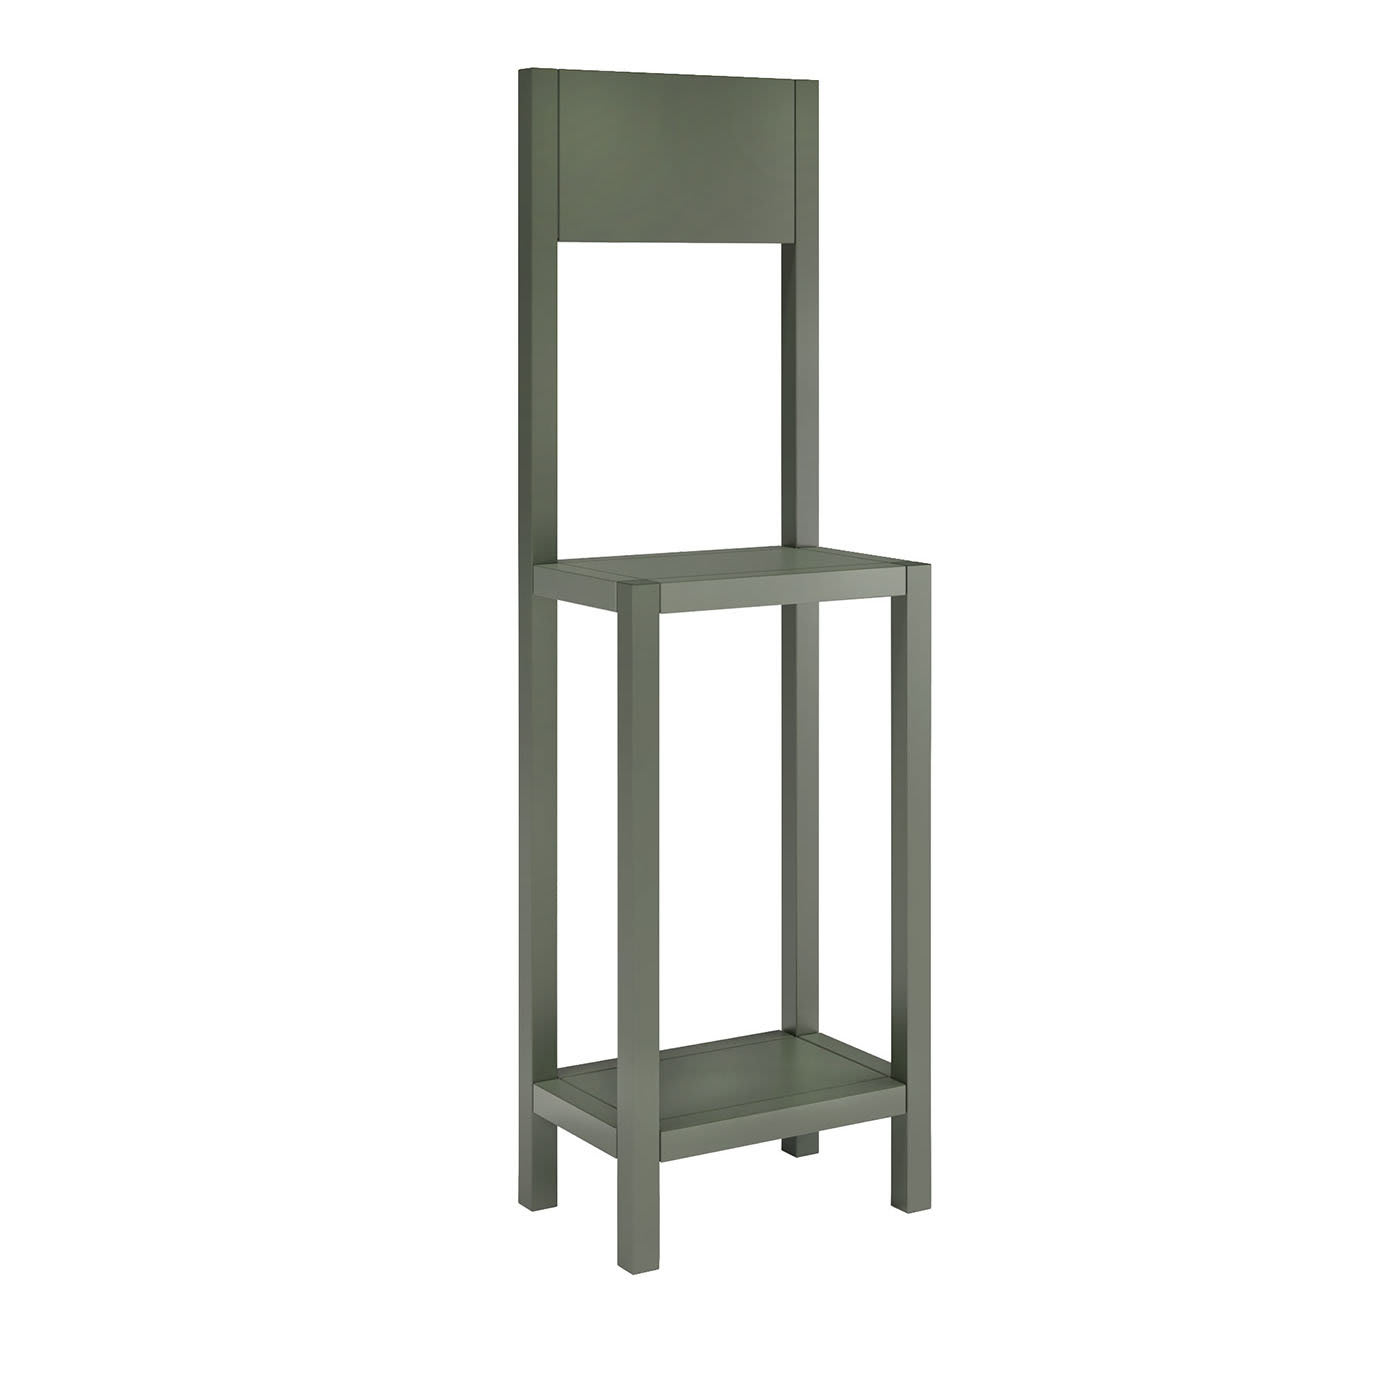 Olive-Green Chair - Loopo